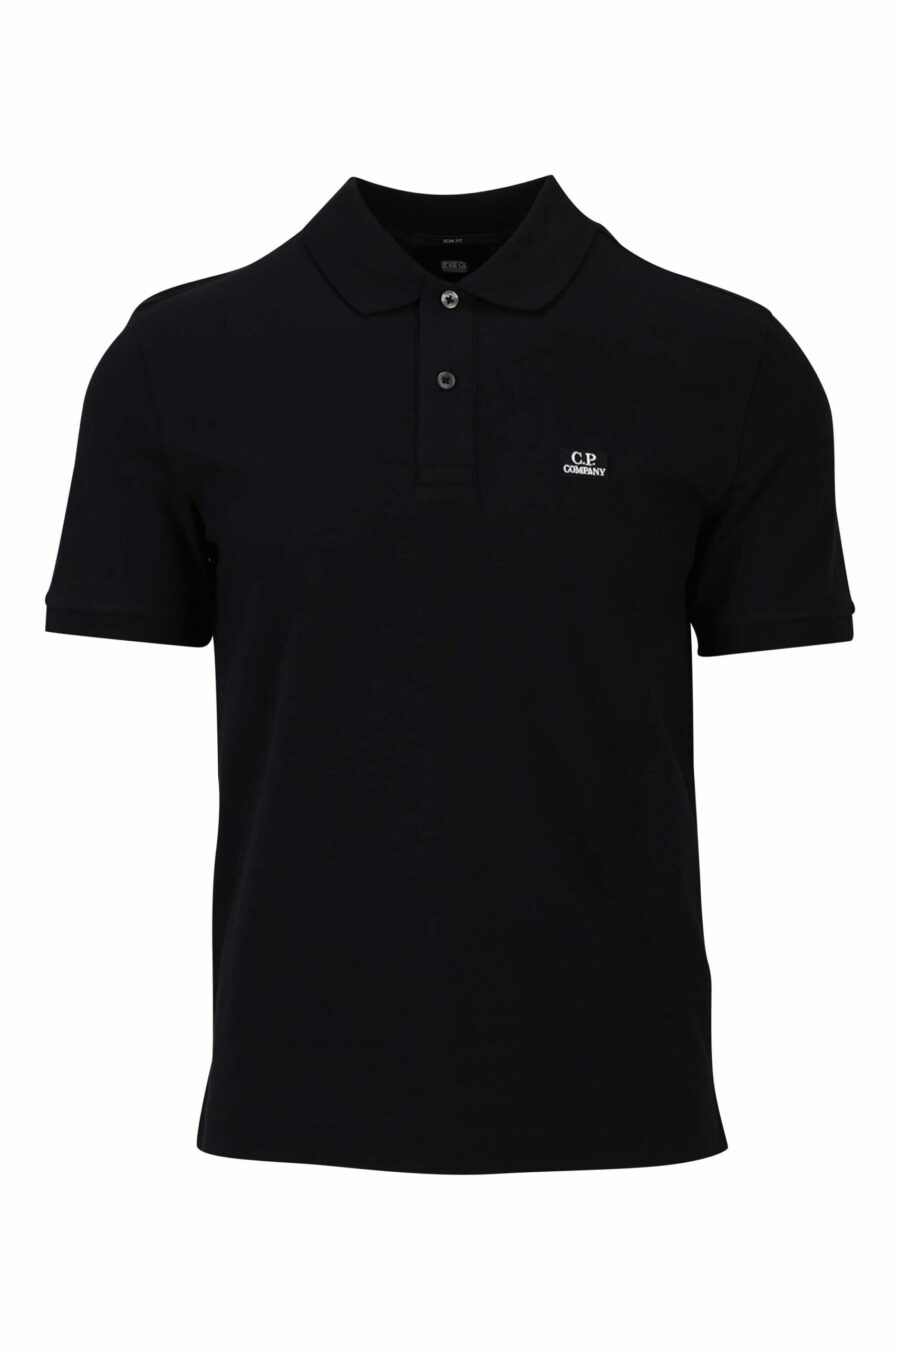 Black polo shirt with mini logo patch - 7620943564884 1 scaled